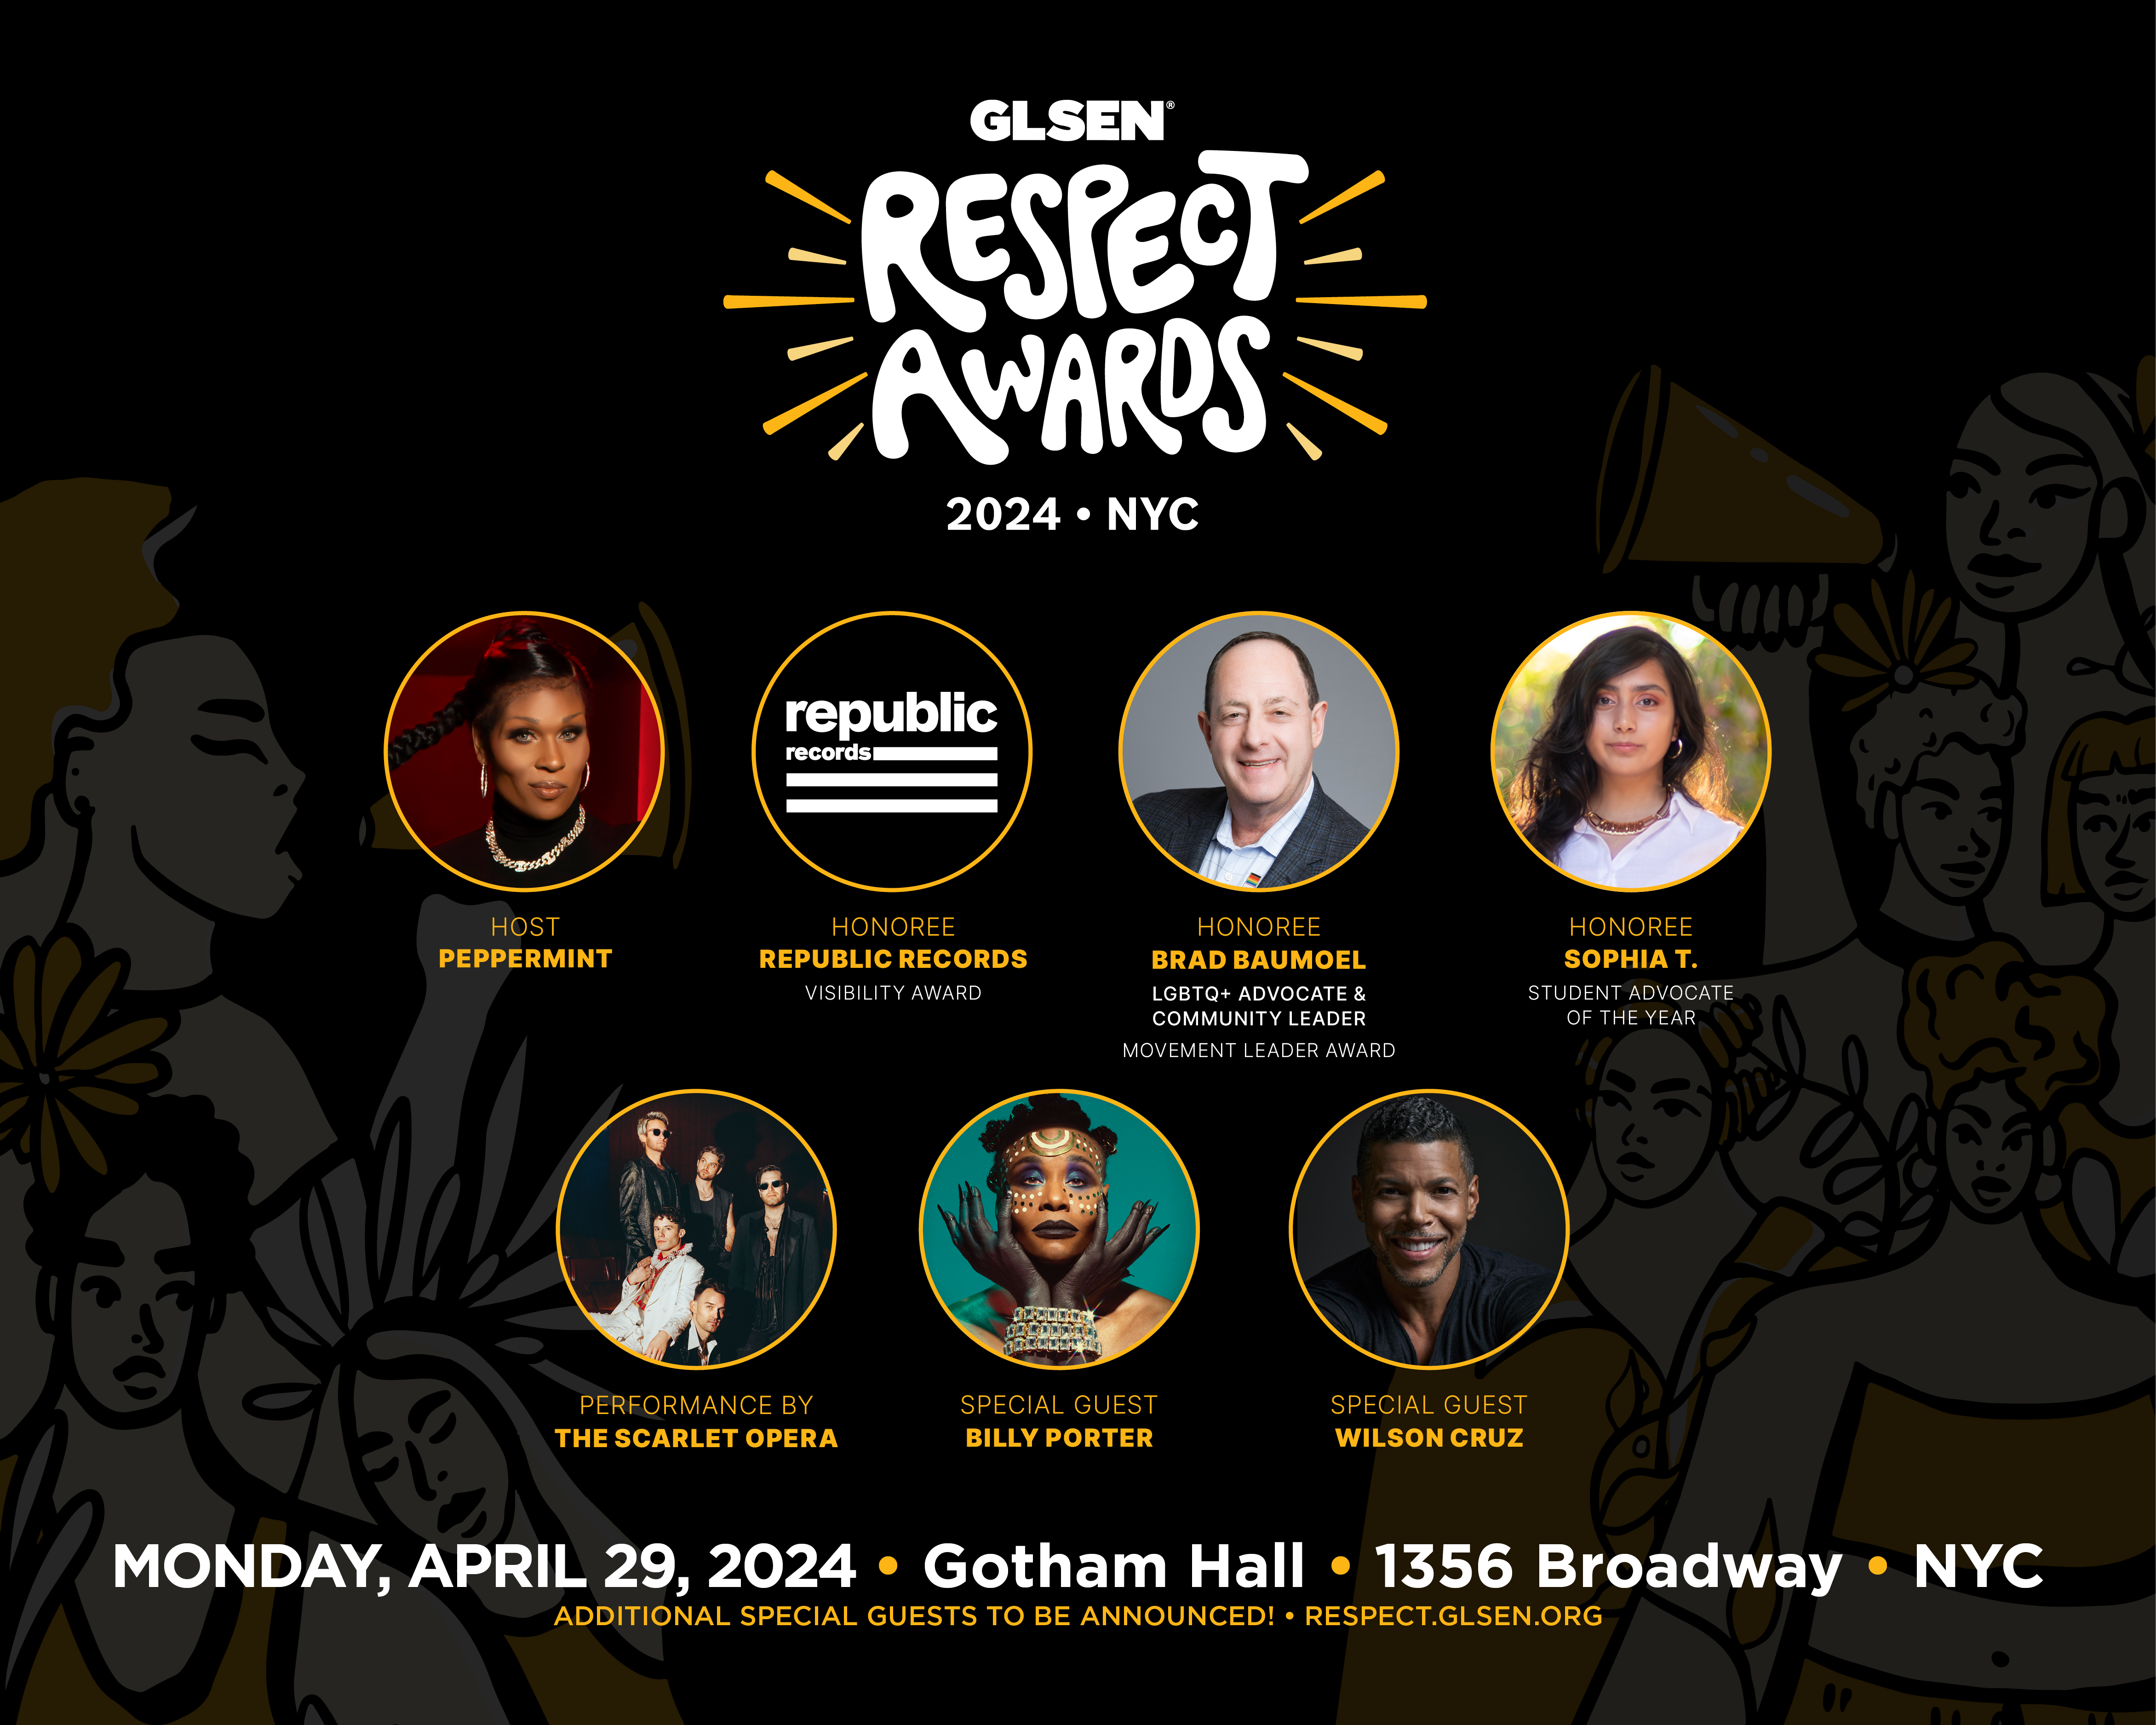 GLSEN Respect Awards are Monday, April 29th!